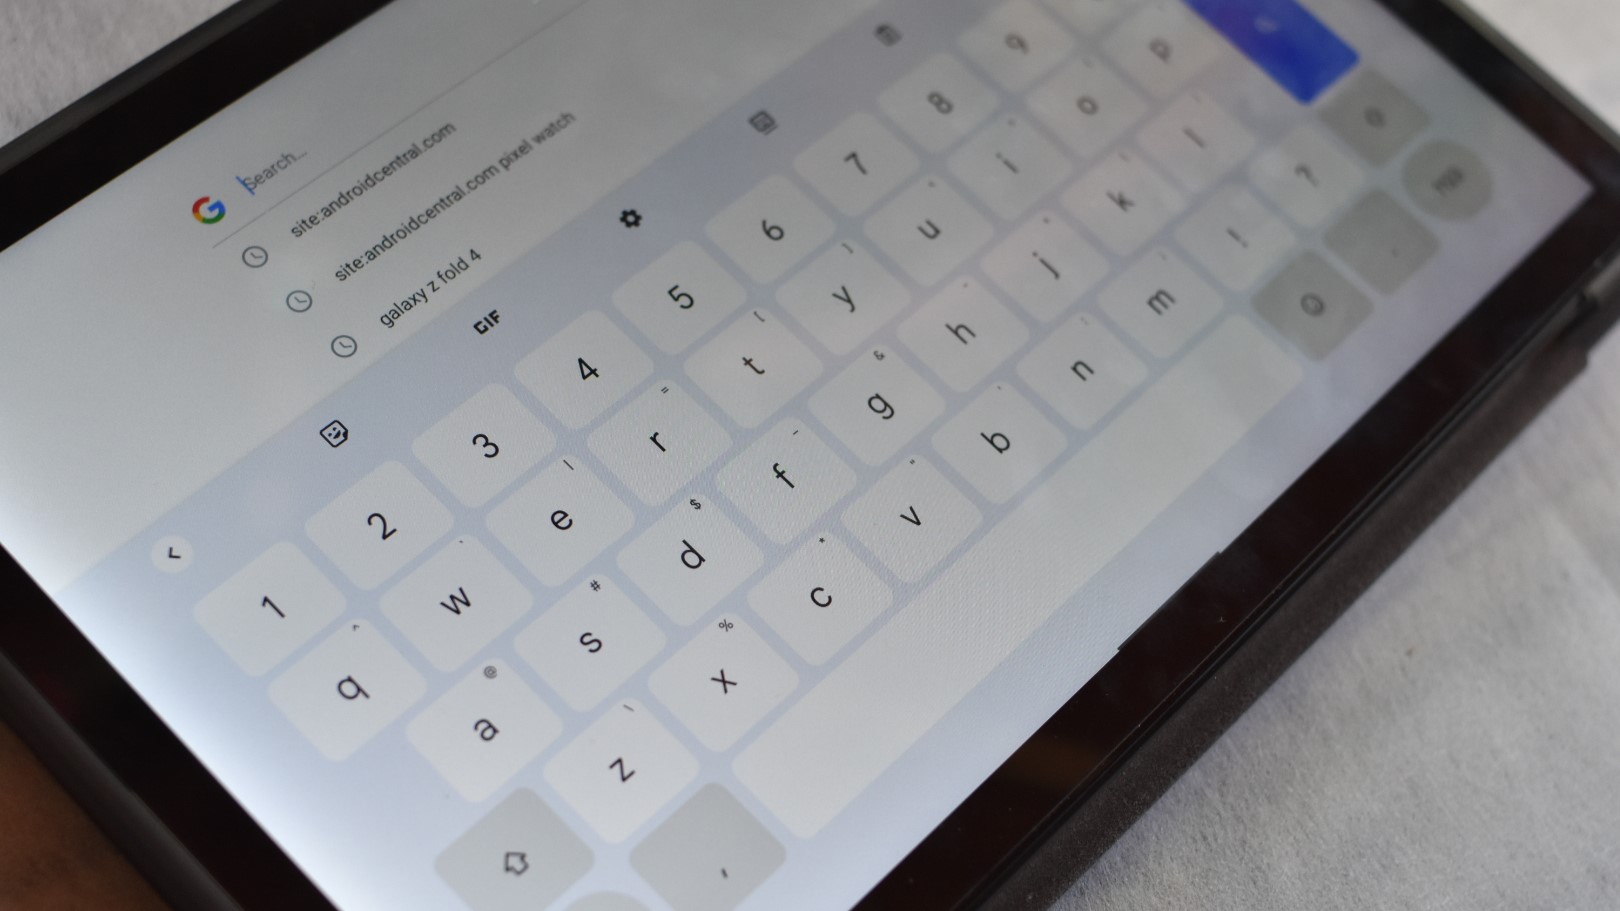 How To Find Keyboard On Android Tablet